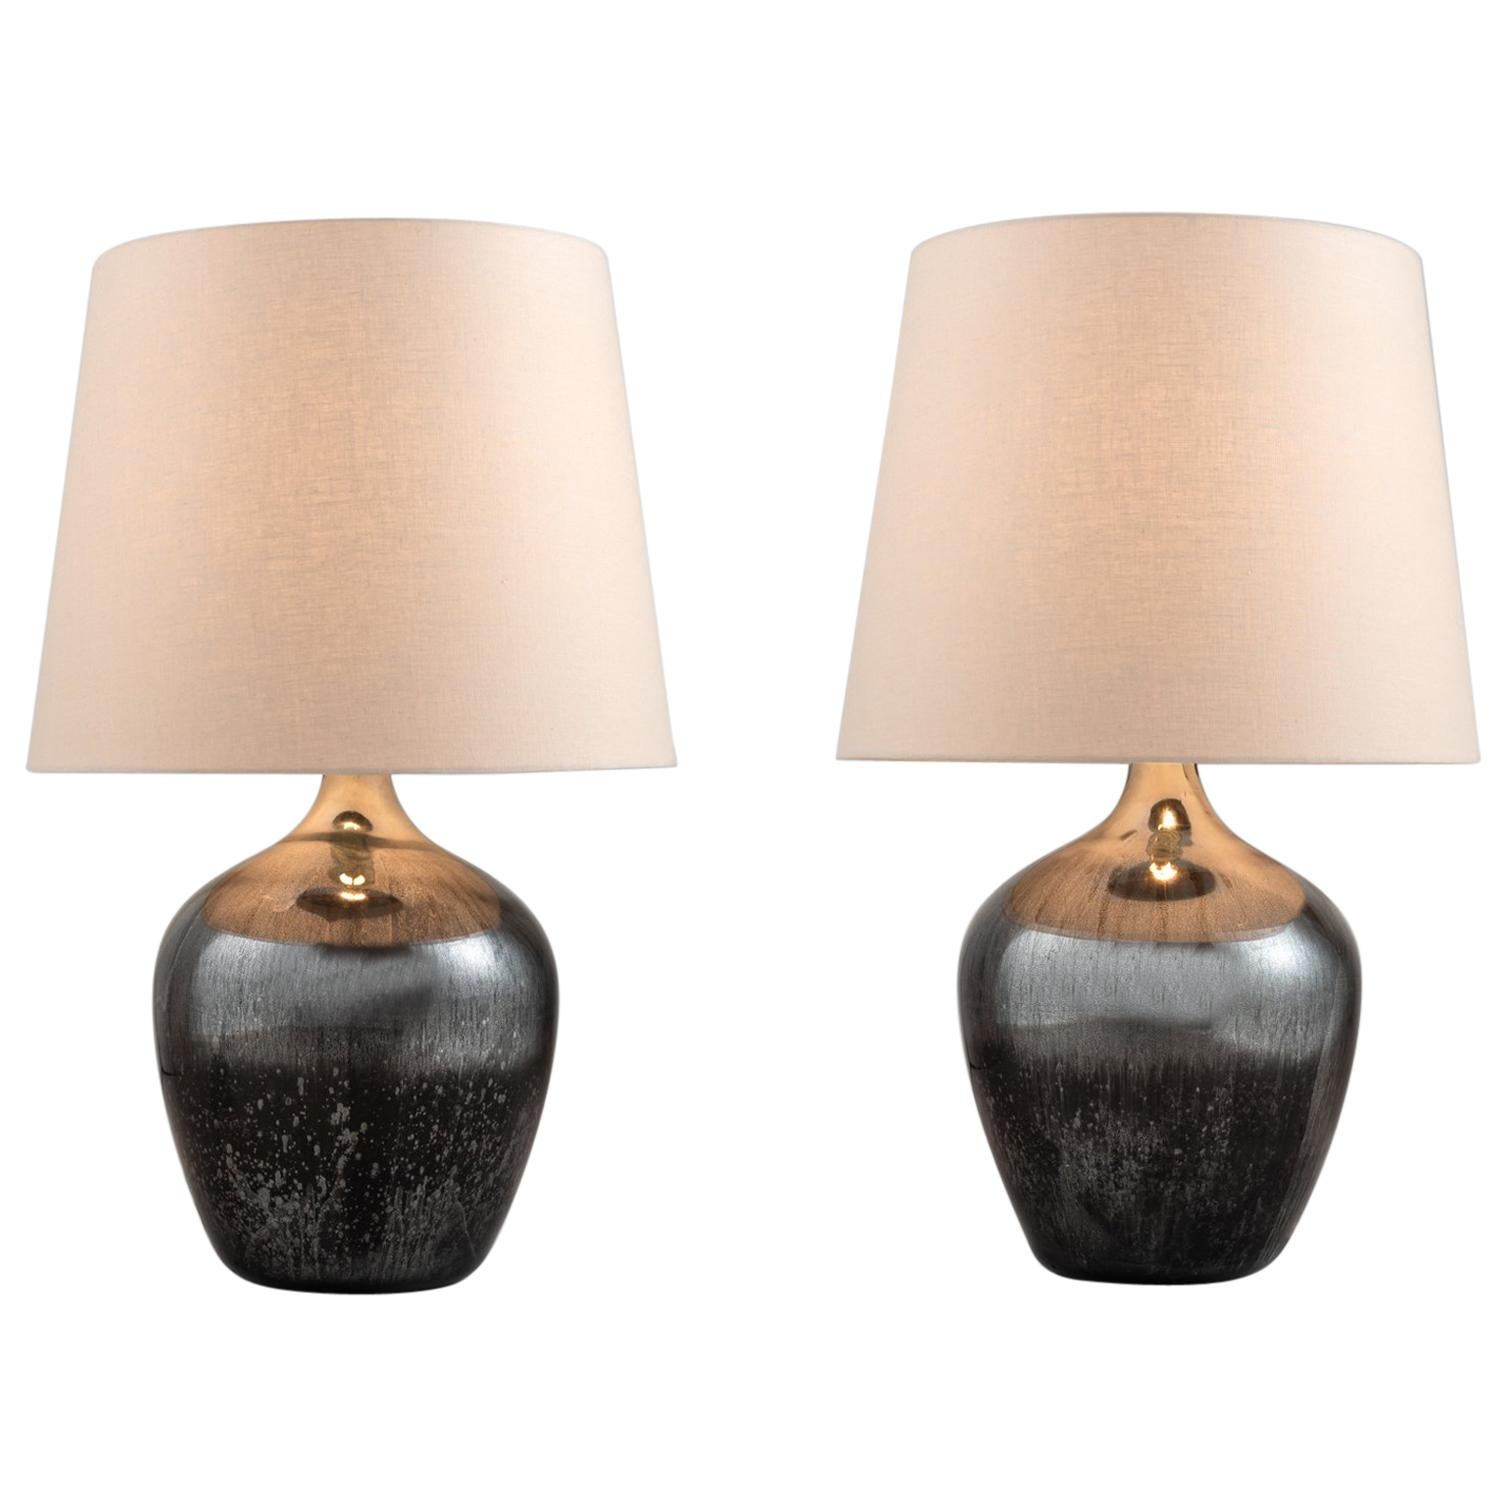 Mottled Mirrored Table Lamps, England circa 1940